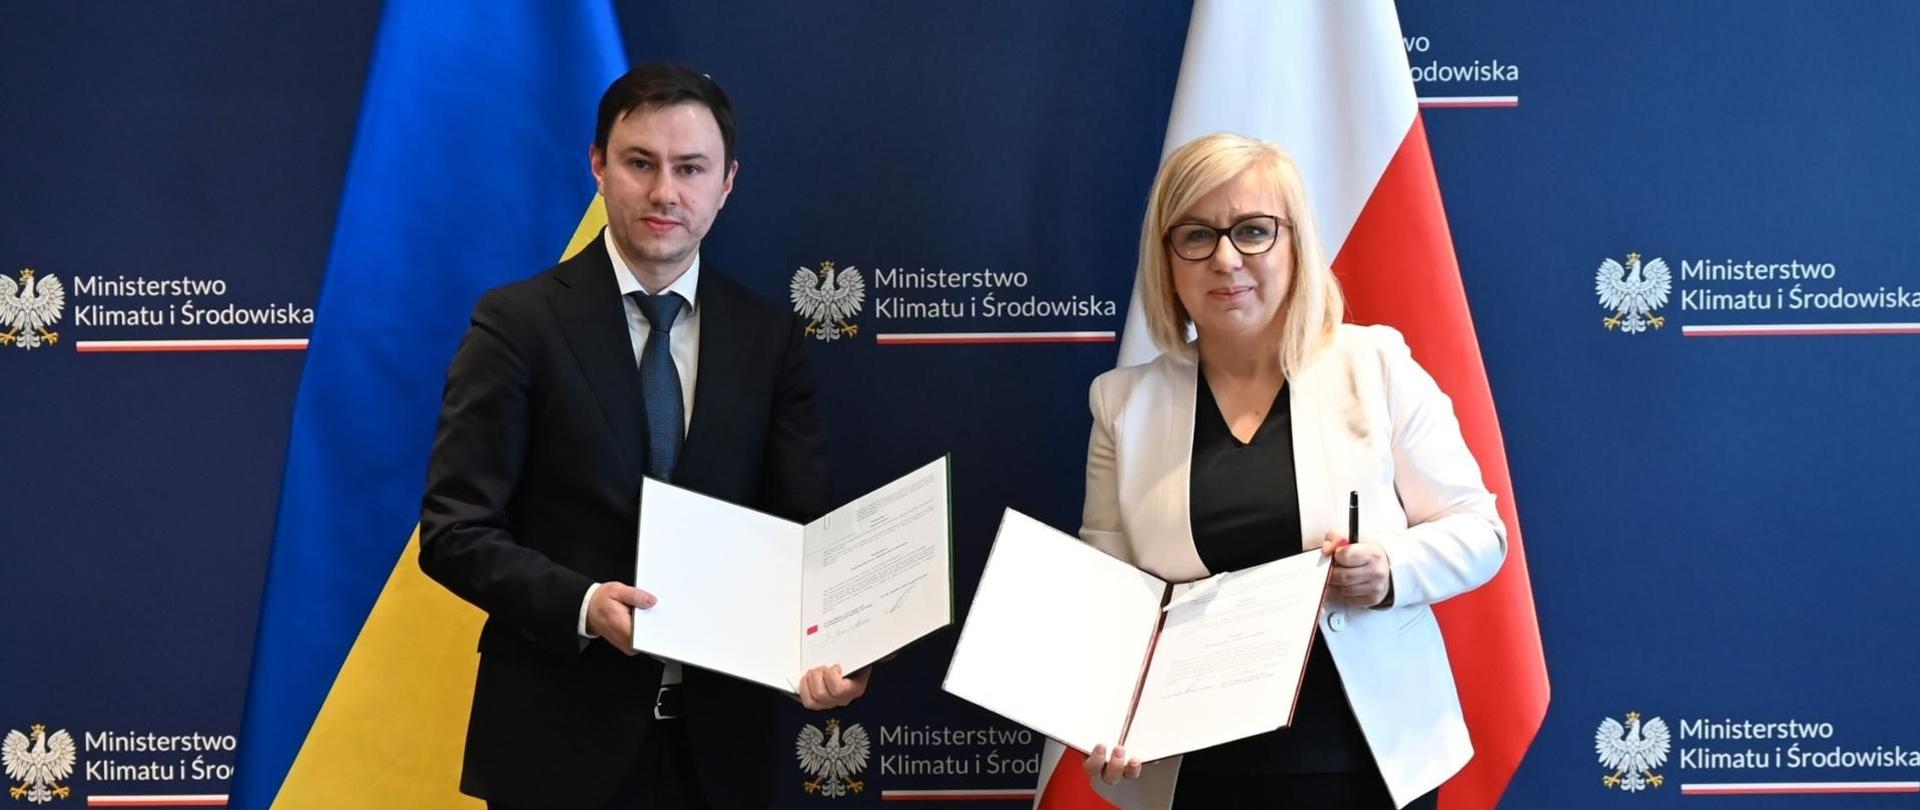 Strengthening relations with Ukraine. Agreement on the energy cooperation signed